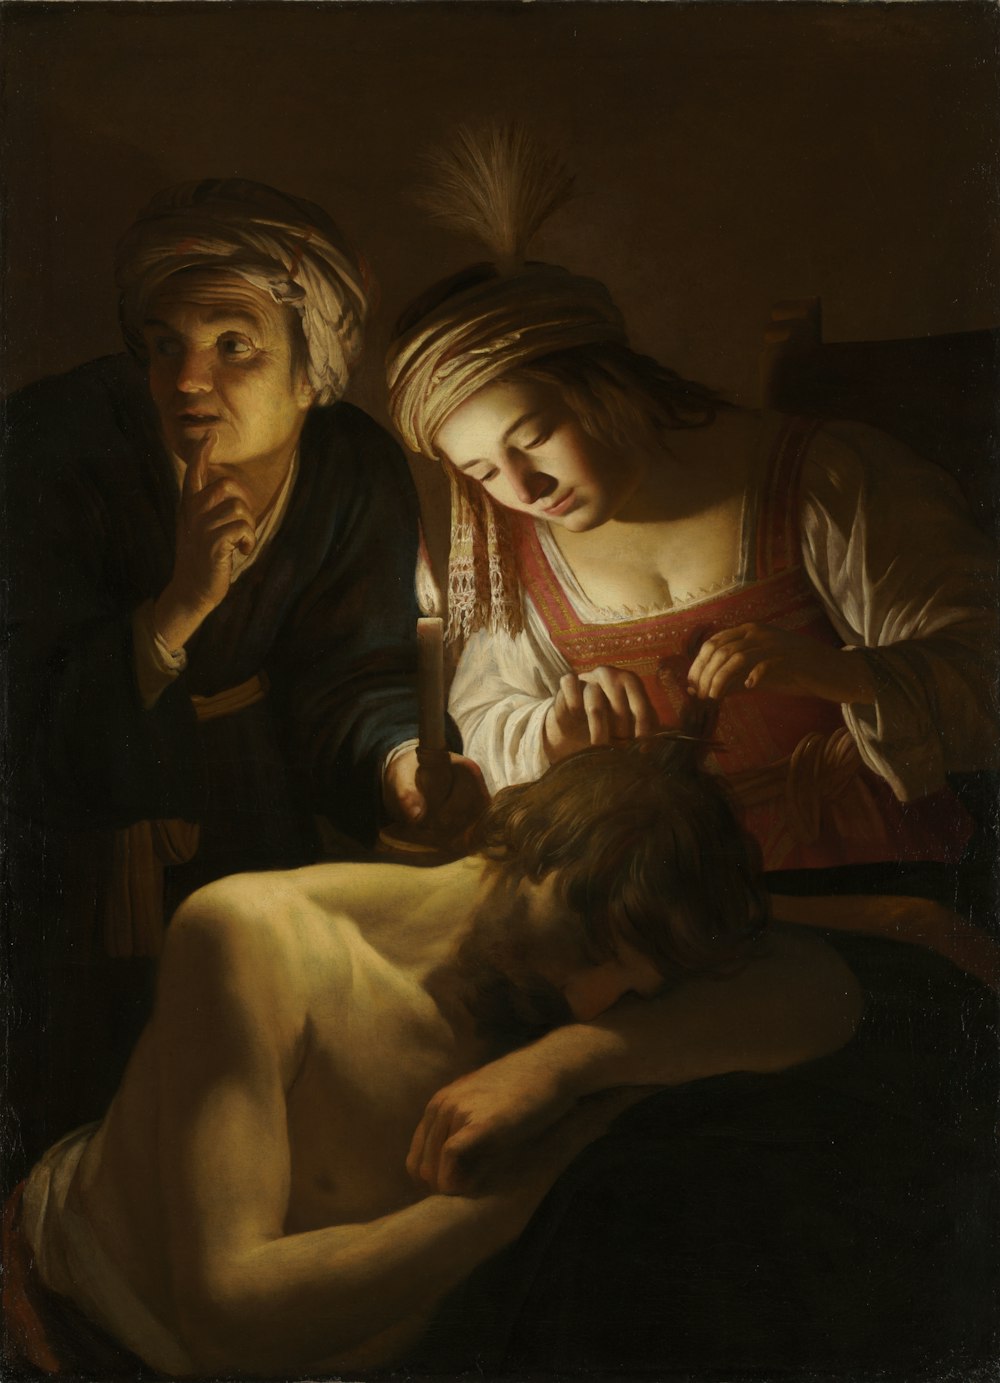 a painting of a woman being tended to by a man